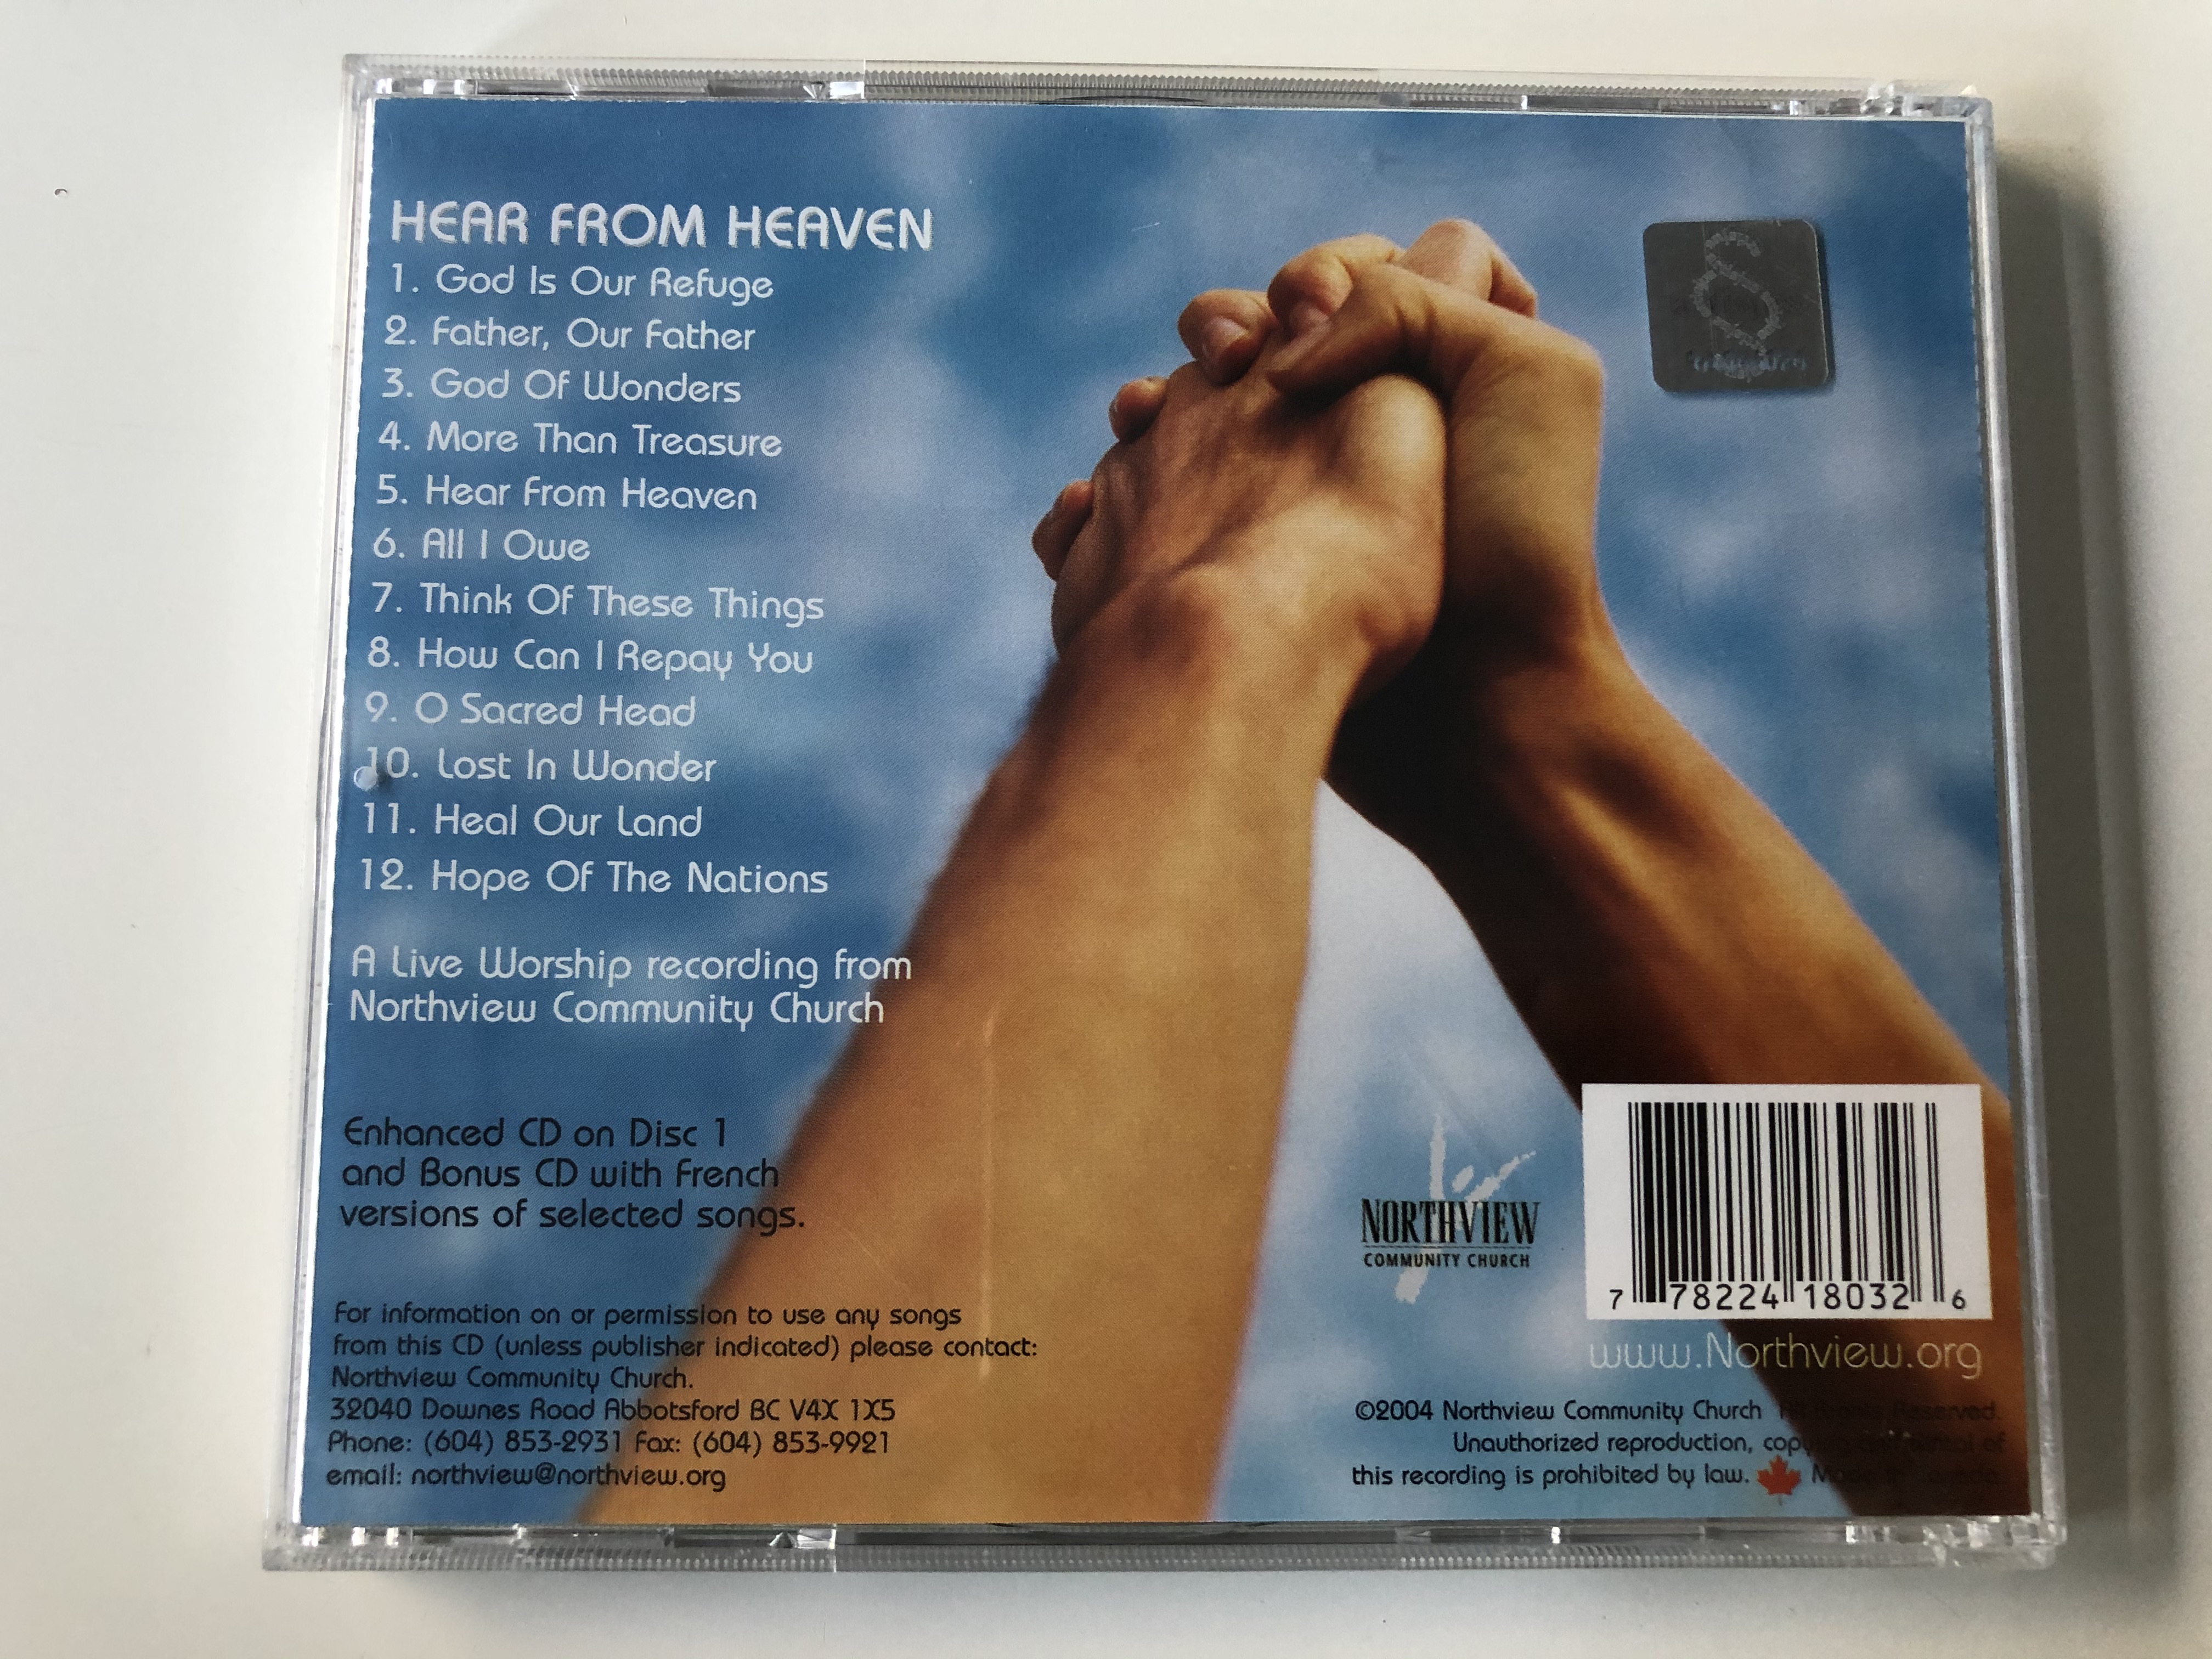 hear-from-heaven-northview-live-2004-worship-leaders-including-johnny-markin-suzanne-thiessen-chris-janz-kevin-boese-amy-klassen-stephanie-redicopp-and-others-northview-community-chu-9-.jpg